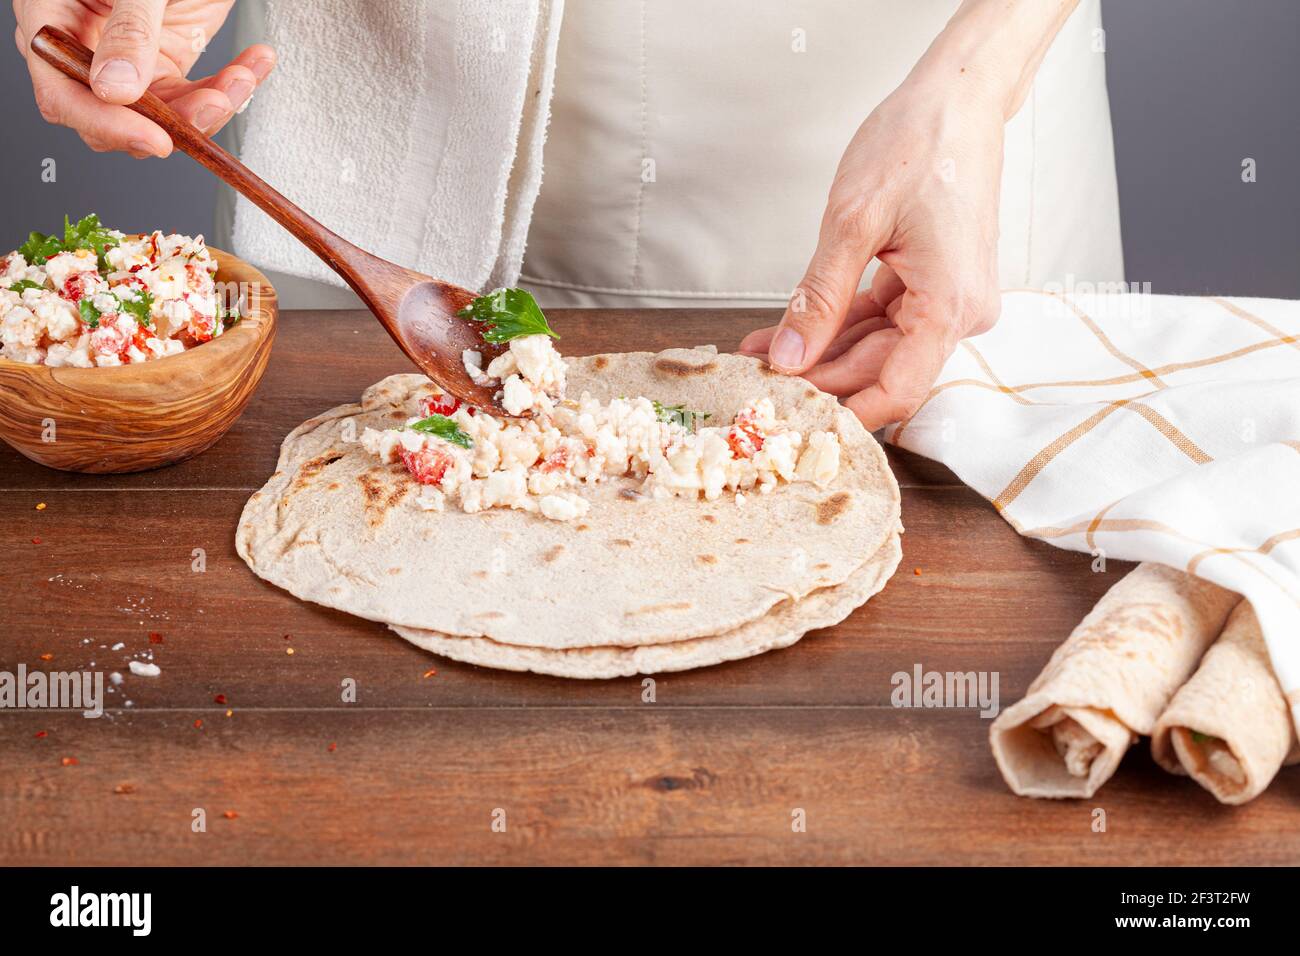 Sikma is a traditional Turkish wrap in mediterranean coast of silifke, mersin. Flat bread known as bazlama is laid and filled with mixture of cheese, Stock Photo